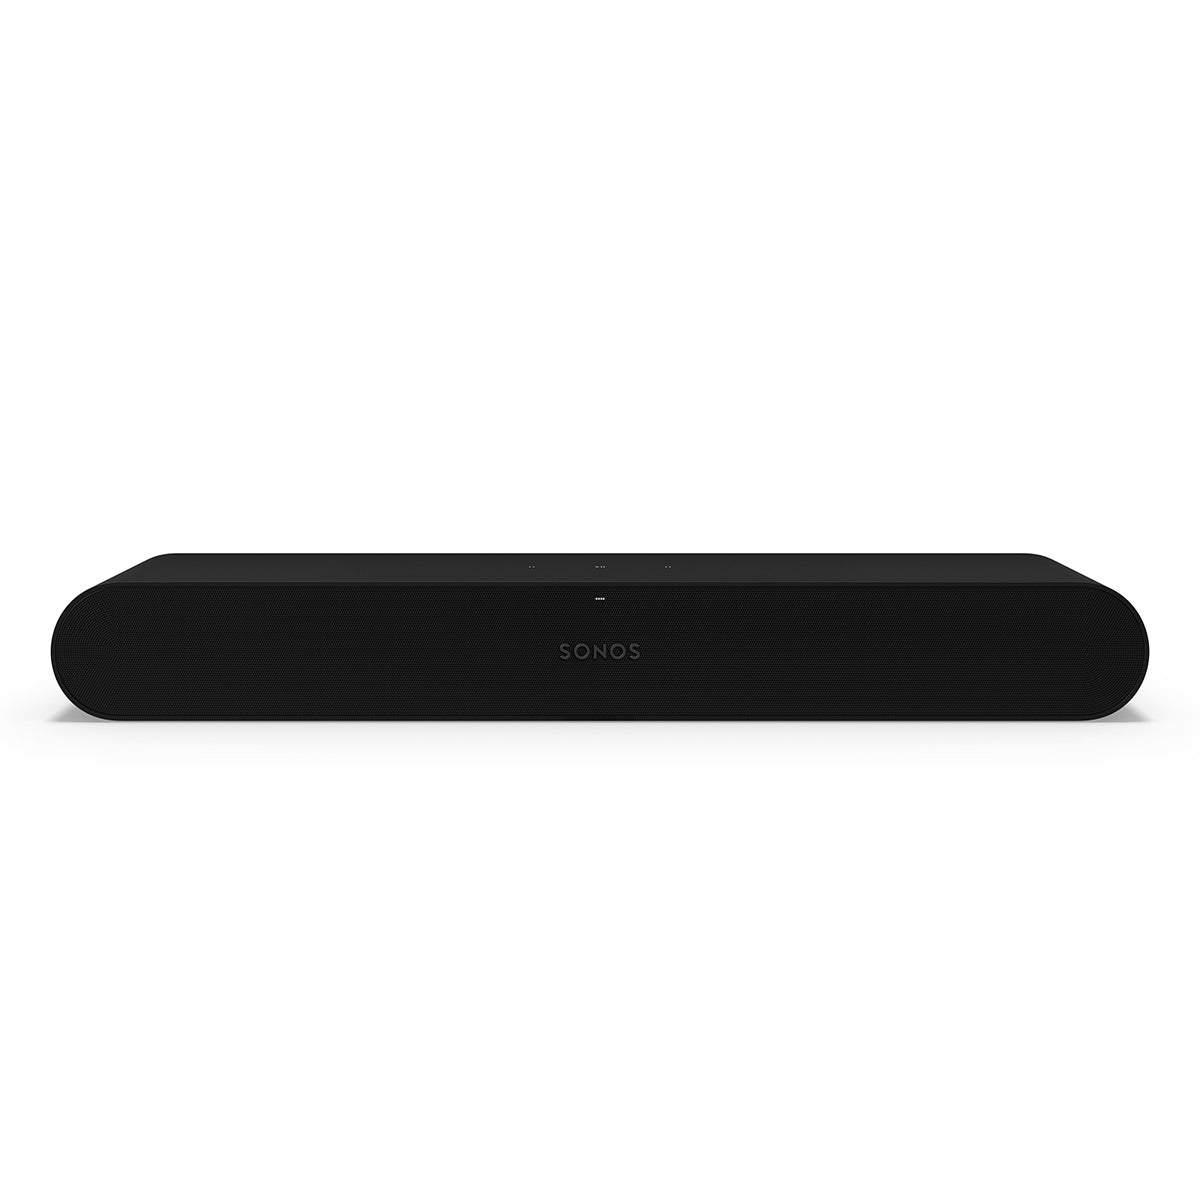 Sonos Immersive Set with Ray Compact Soundbar (Black), Sub Mini Wireless Subwoofer (Black), and Pair of One SL Wireless Streaming Speaker (Black)